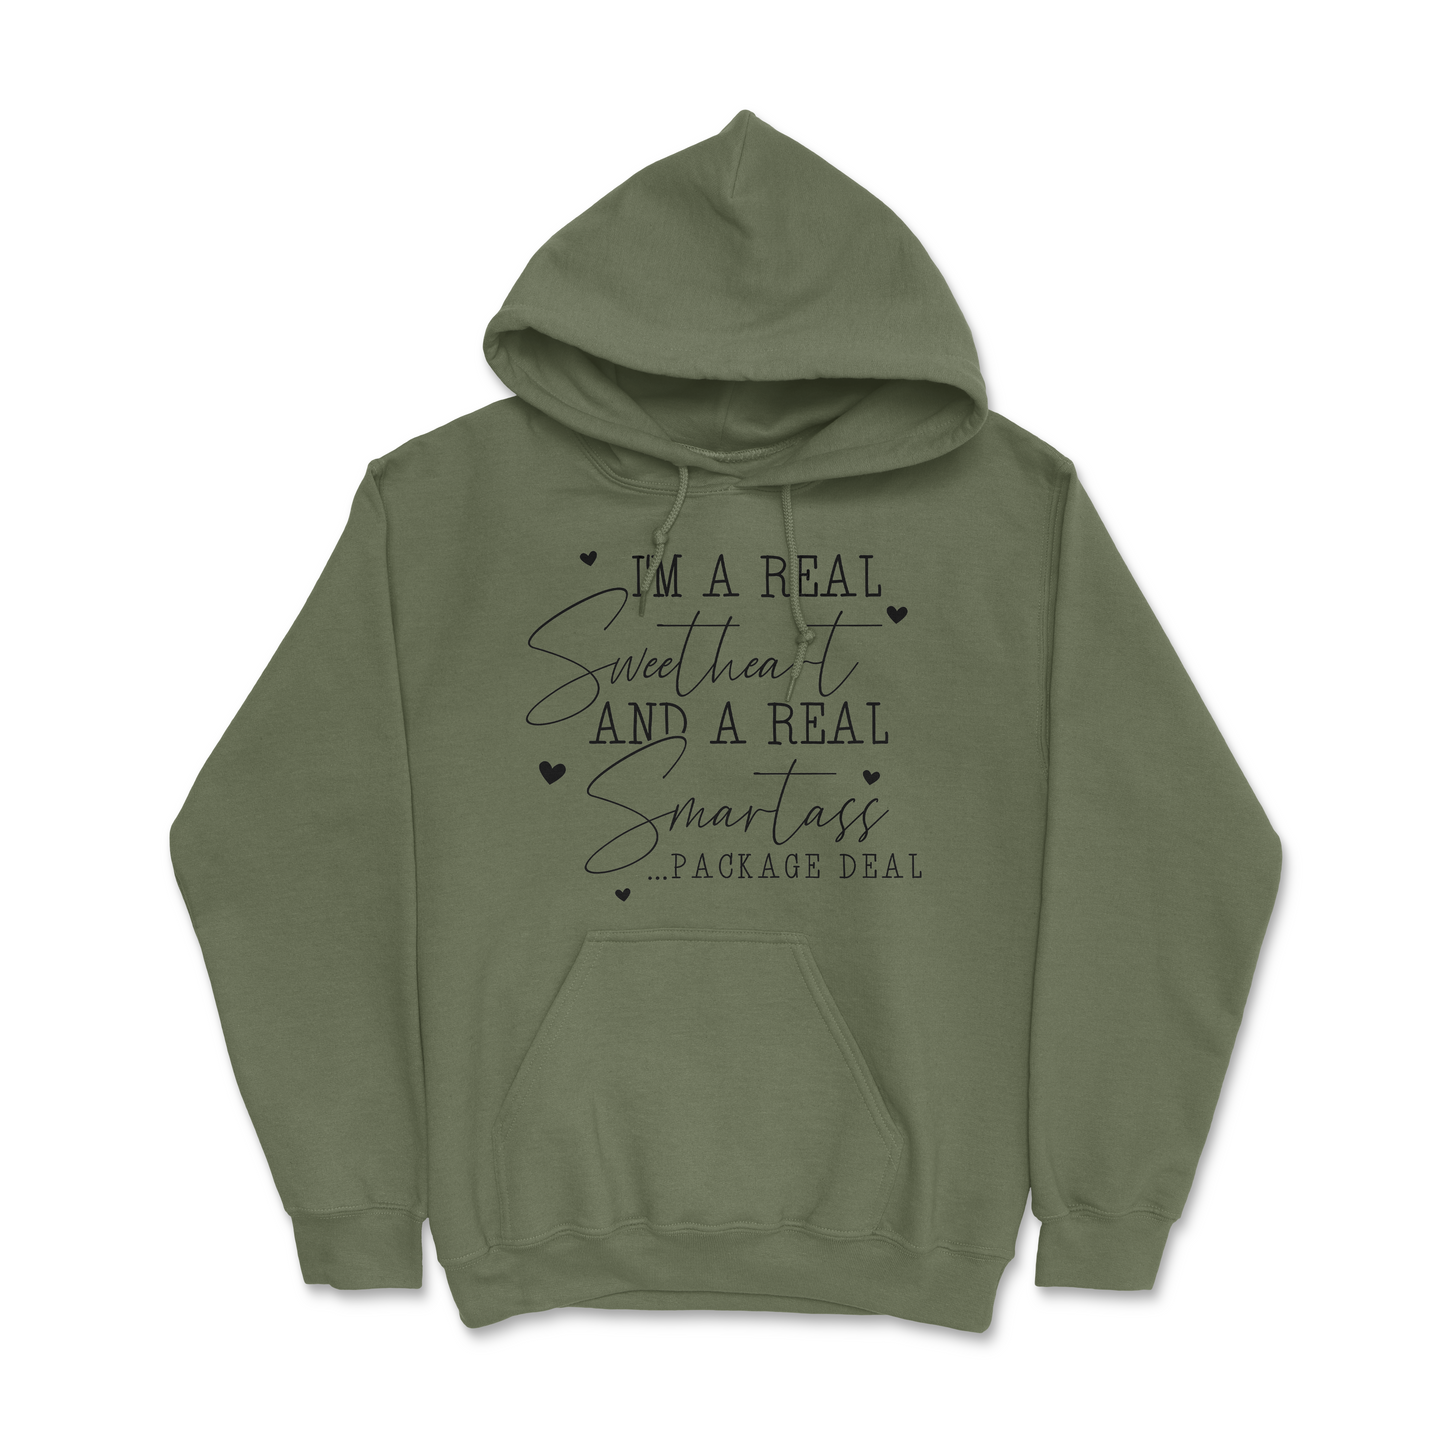 I'm A Real Sweetheart and Smartass Package Deal Hoodie